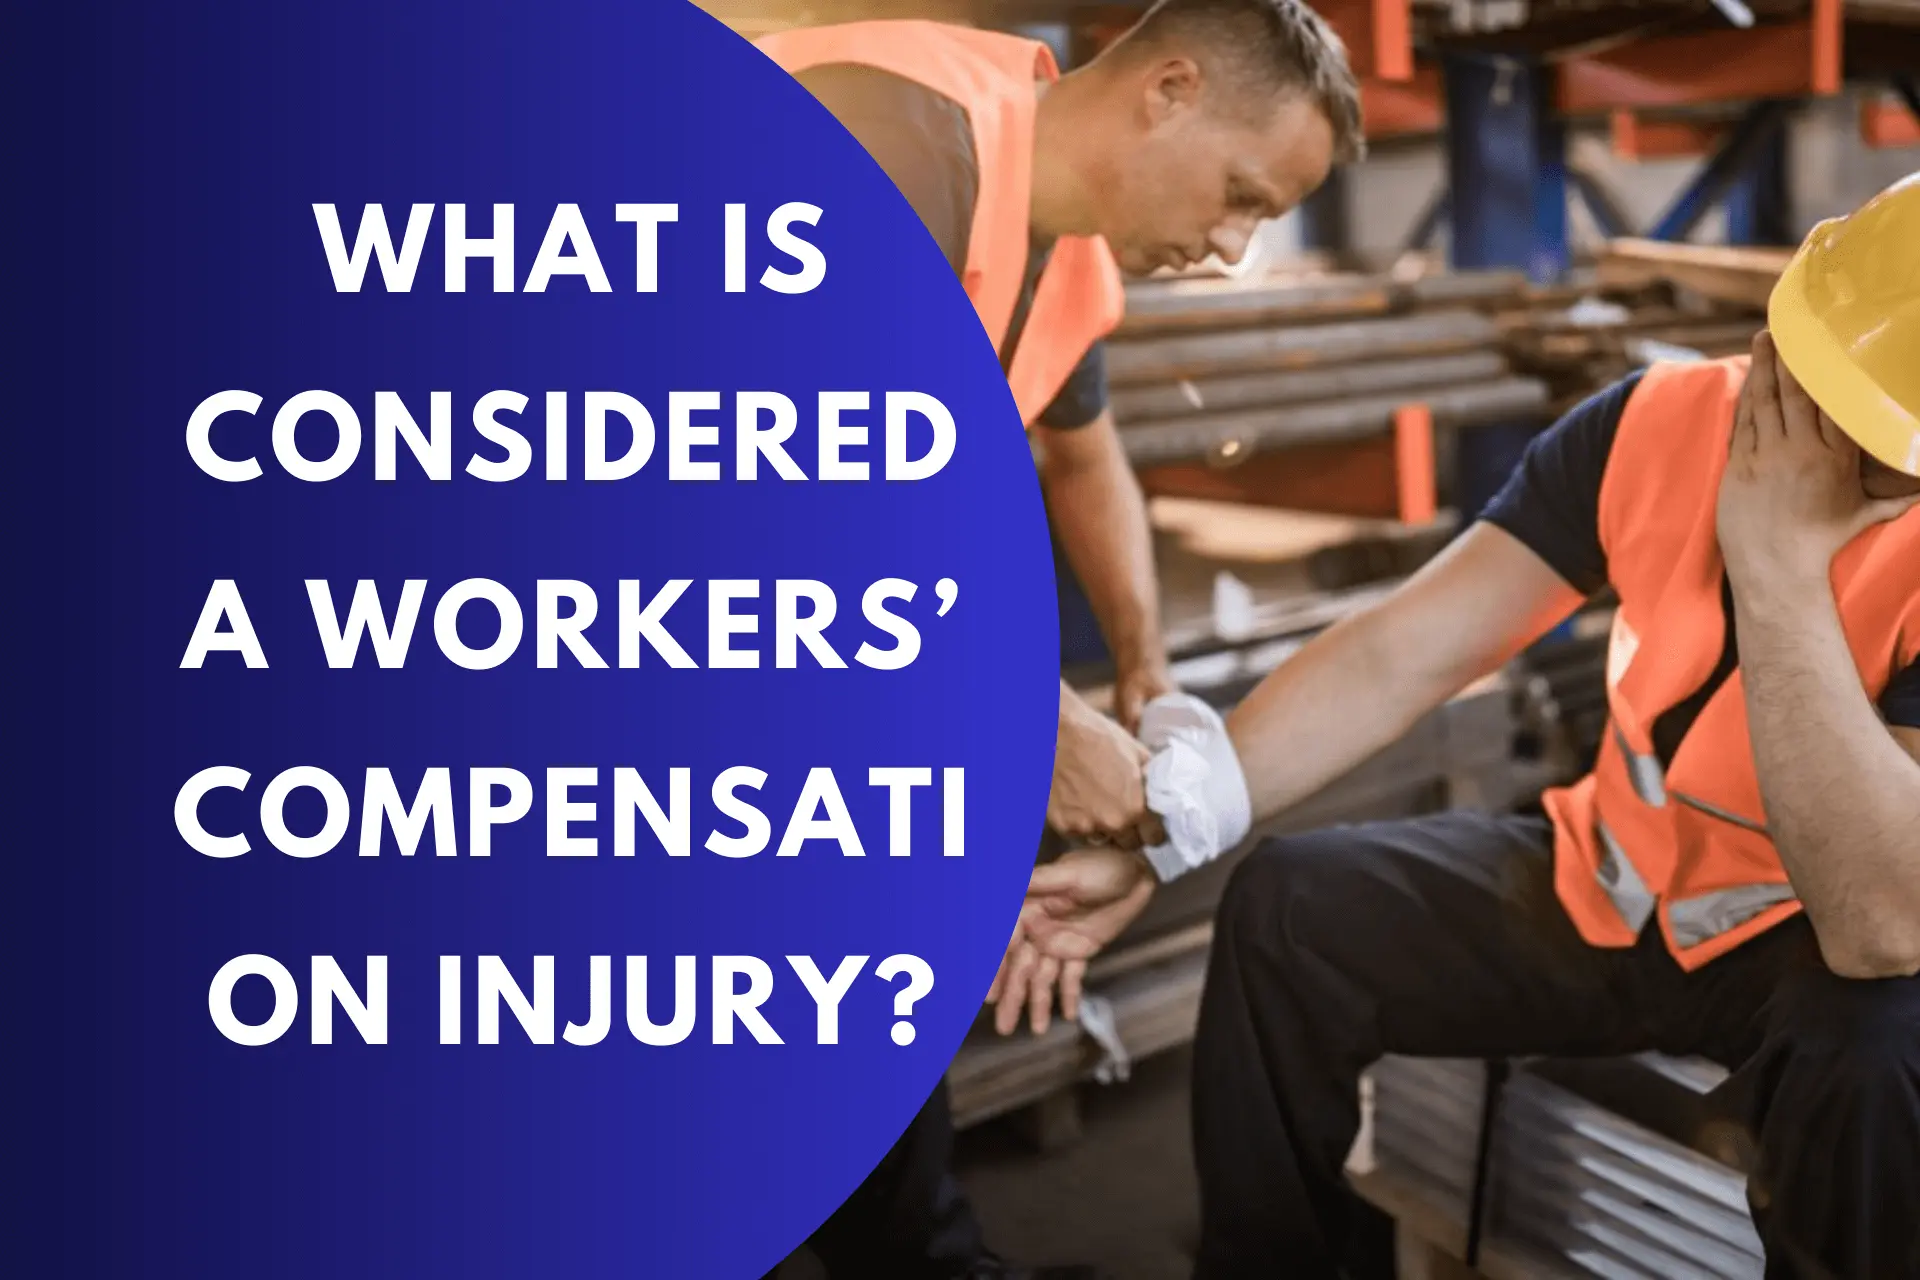 What is considered a workers’ compensation injury